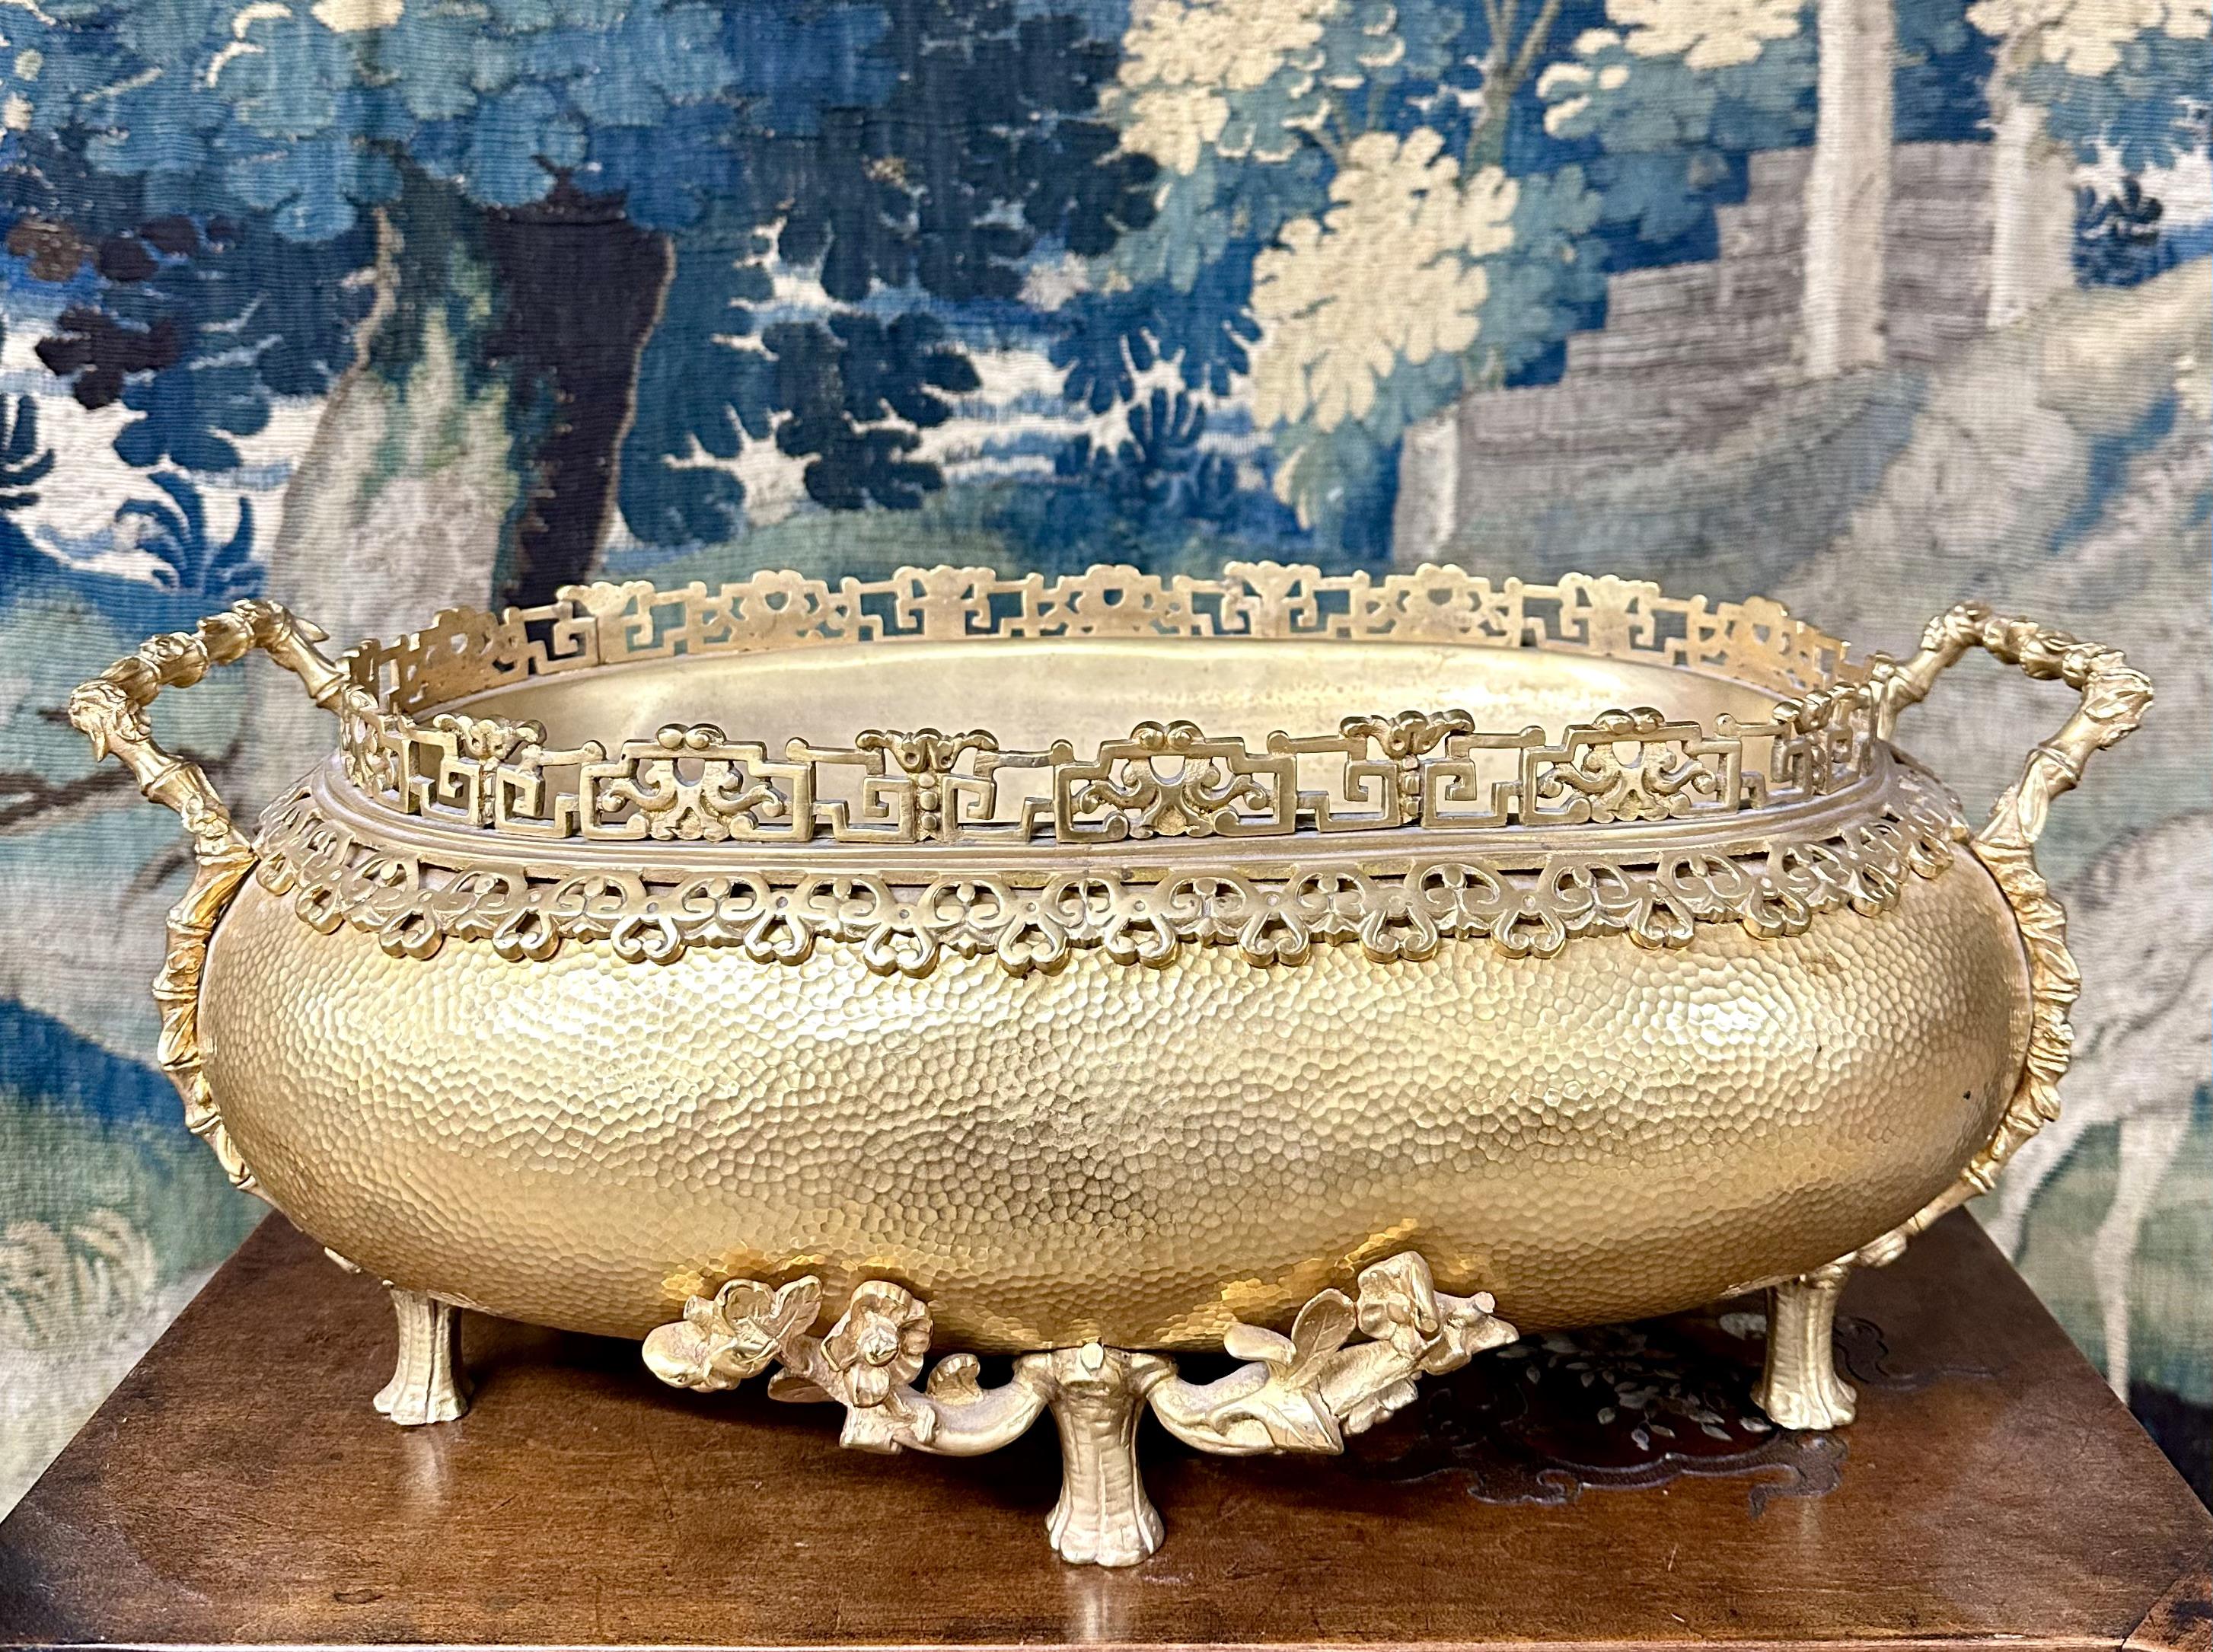 Large gilt bronze planter with Japanese decor composed of a frieze at the neck, the handles and the base with vegetal decor. The basin is in hammered bronze and has a stamp of the Compagnie des bronzes de Bruxelles under the base. Very good state.